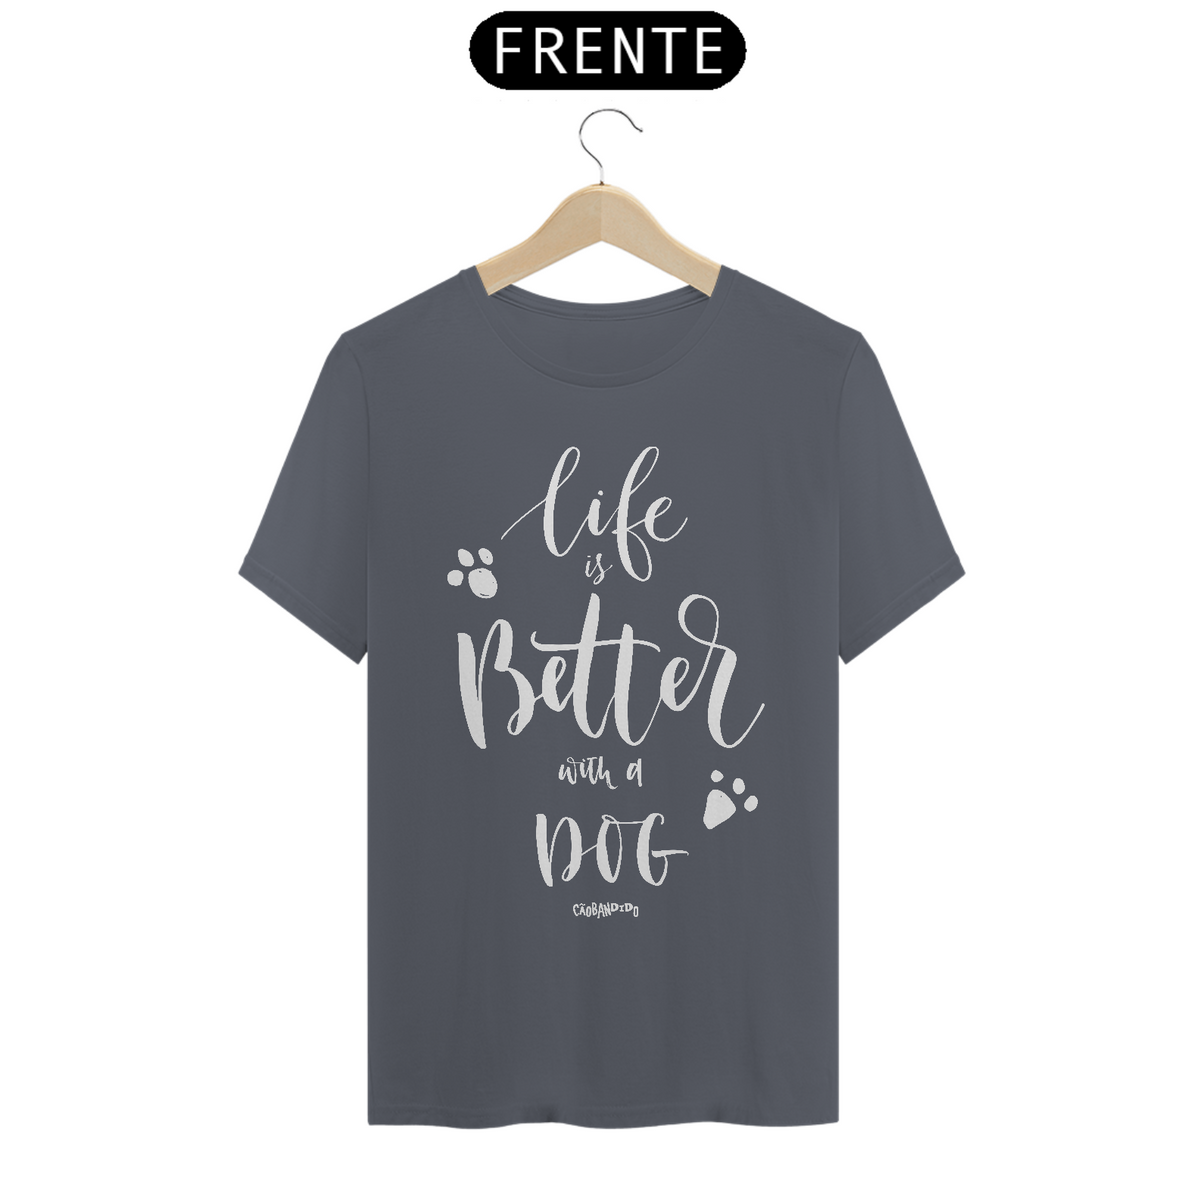 Nome do produto: Camiseta Life is Better With a Dog